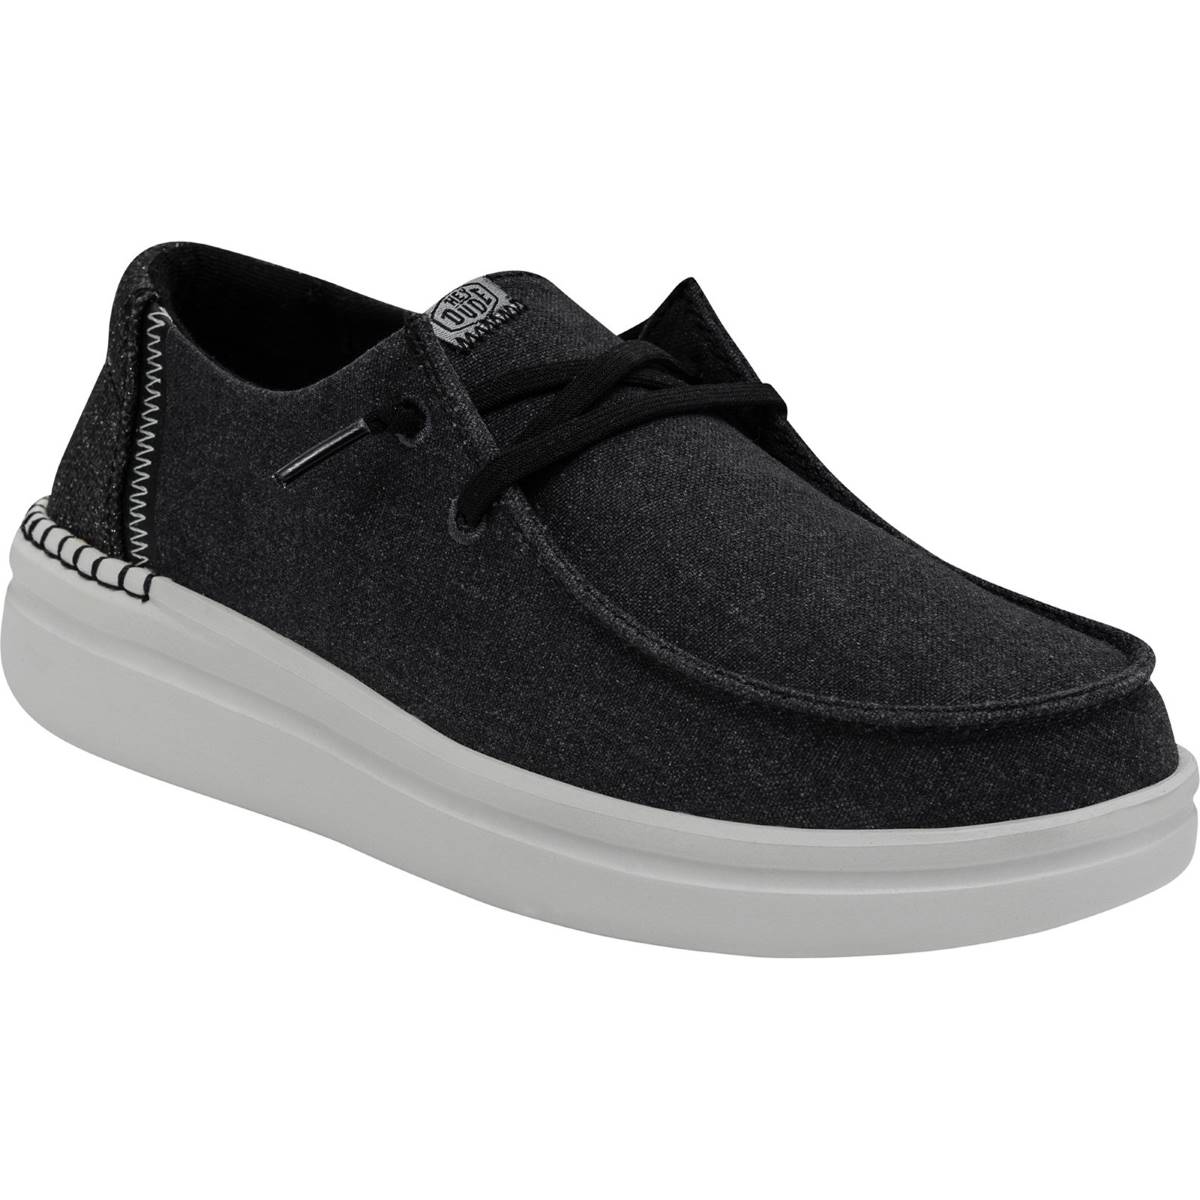 Hey Dude Wendy Rise Black Womens trainers 40074-001 in a Plain Textile in Size 8